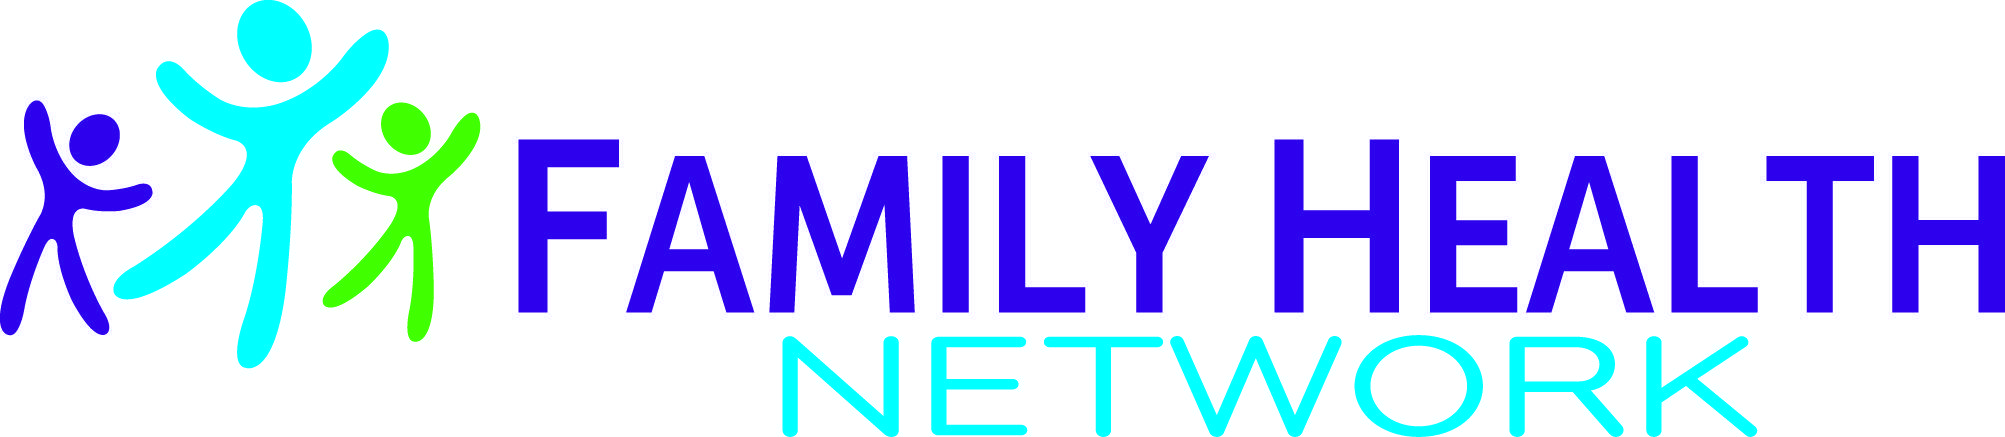 Fhn Logo - Family Health Network Appoints Top Medical Expert from Johns Hopkins ...